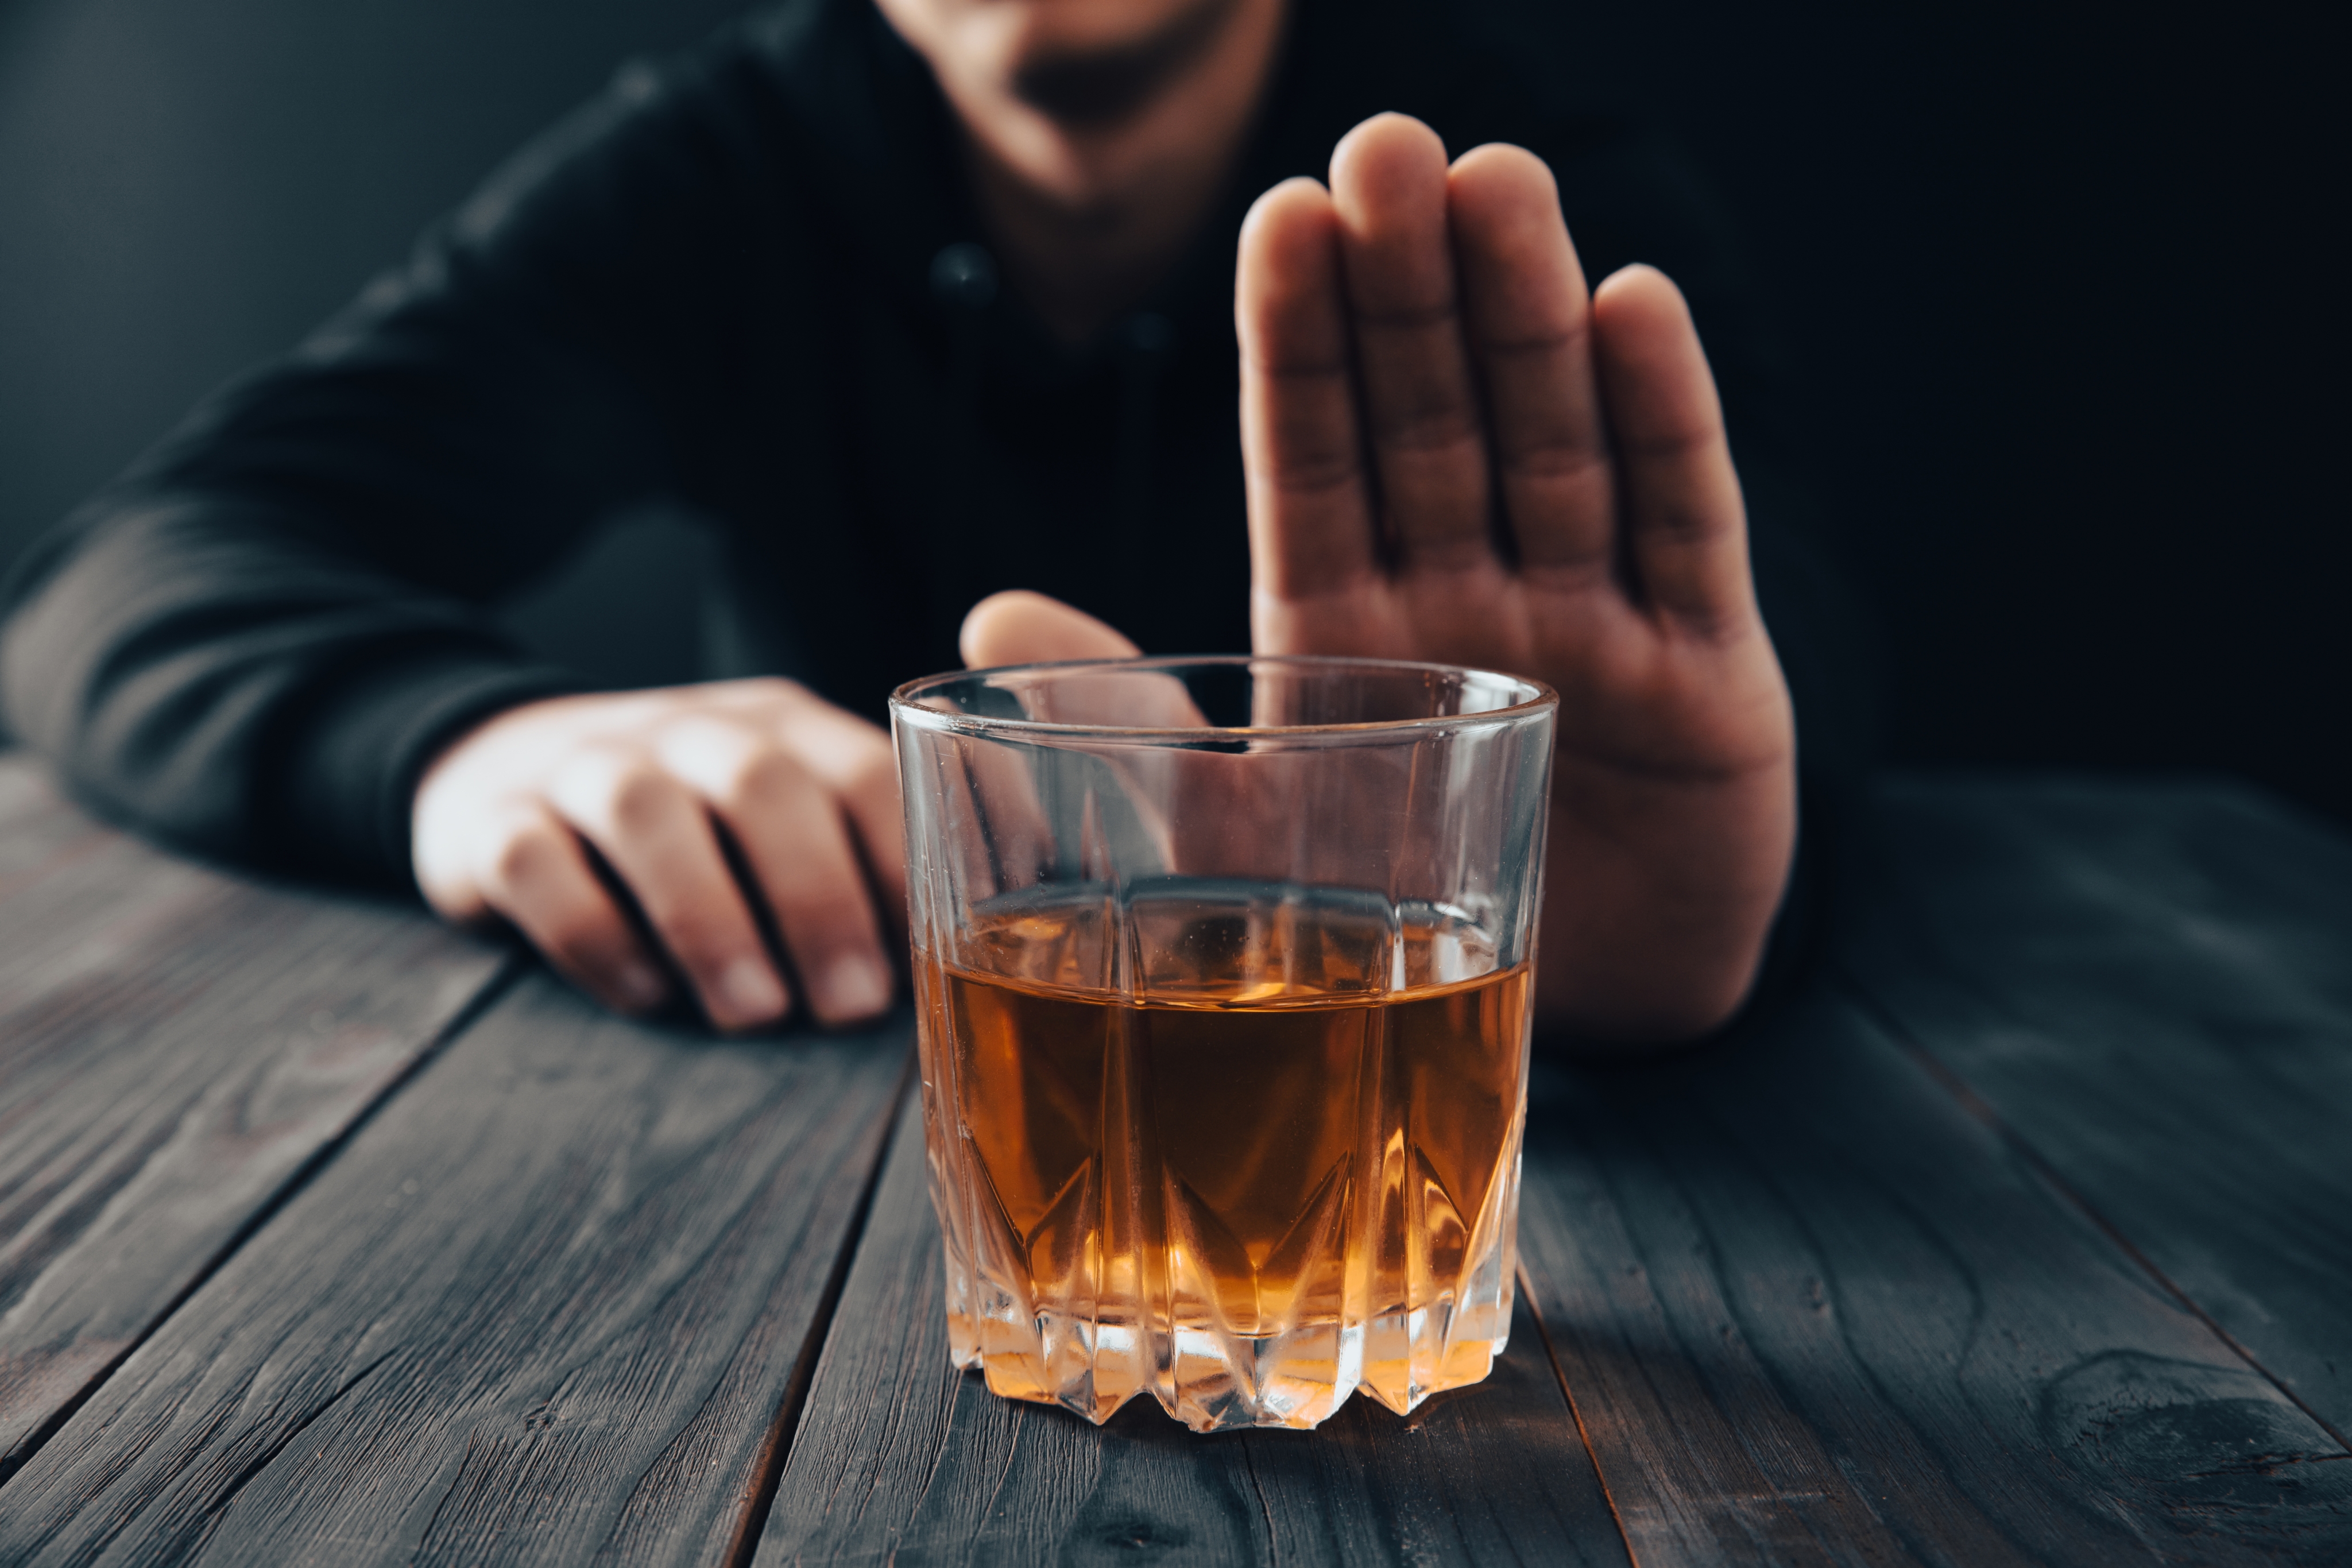 4 Ways To Promote Alcohol More Responsibly